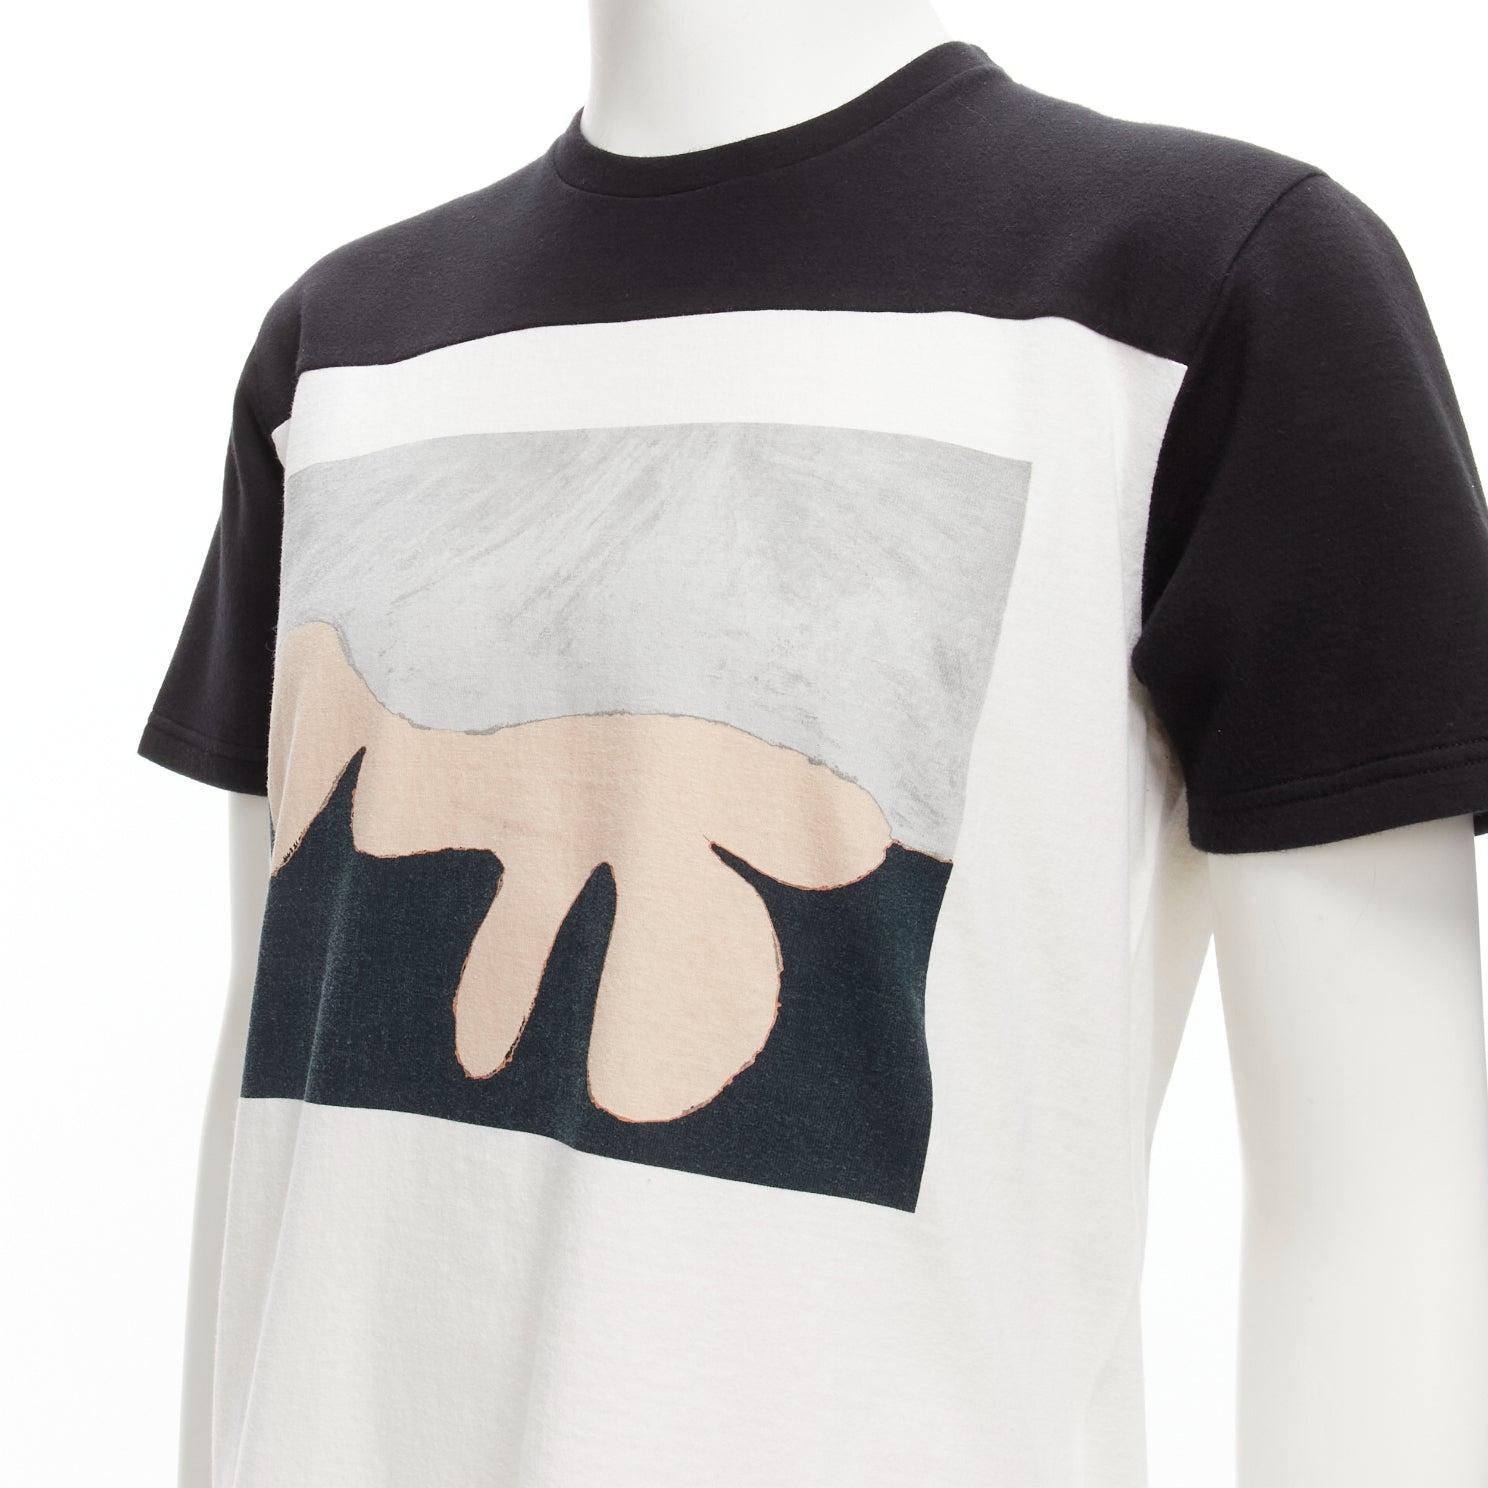 MARNI white black cotton blend abstract portrait print colorblock boxy top IT48 M
Reference: JSLE/A00031
Brand: Marni
Material: Cotton, Blend
Color: White, Black
Pattern: Abstract
Closure: Pullover
Extra Details: Black and white panelled back.
Made